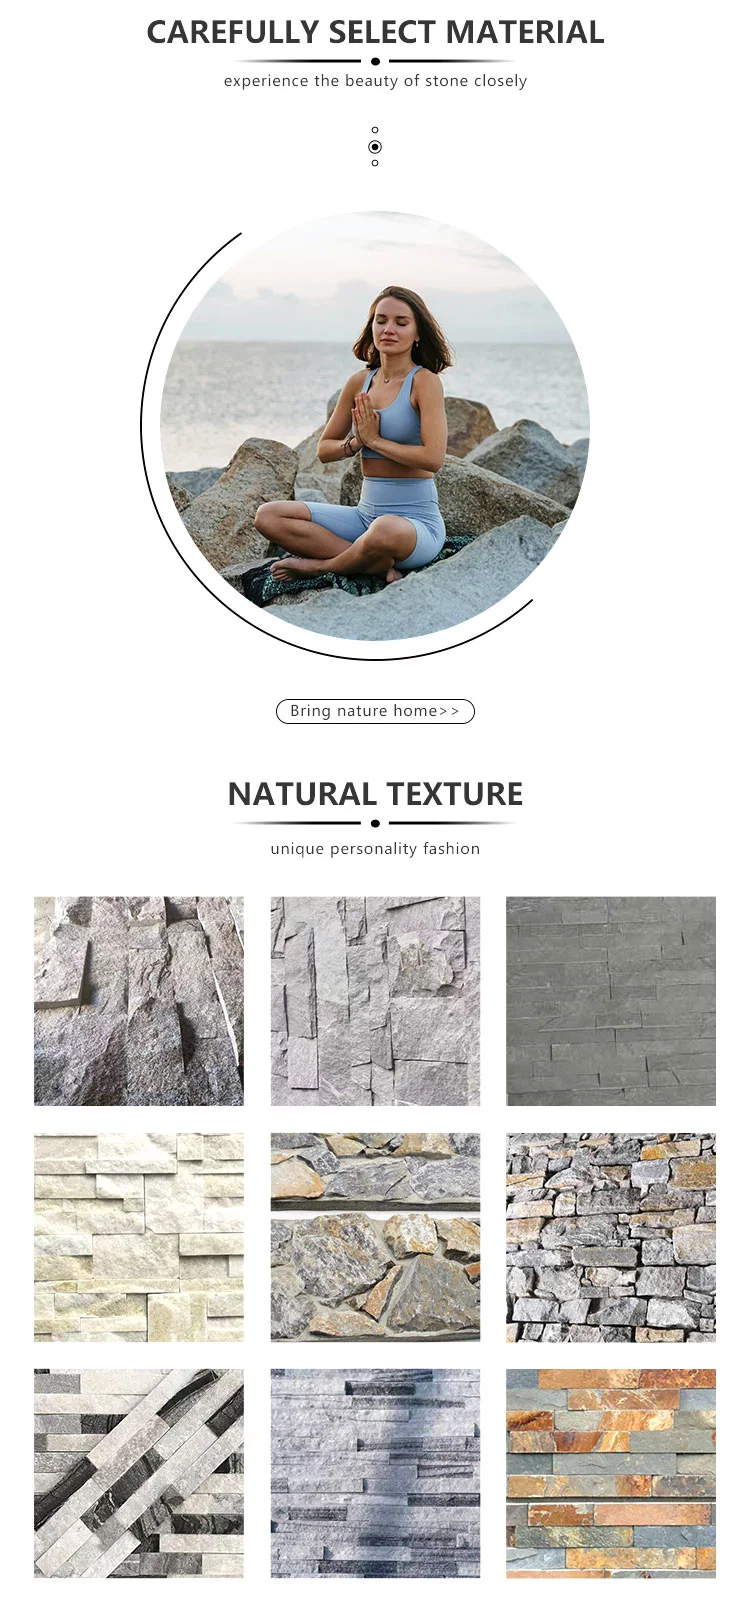 Blve Nordic Indoor Fireplace Exterior Cladding Natural Stone Tiles Culture Stone Wall Panel